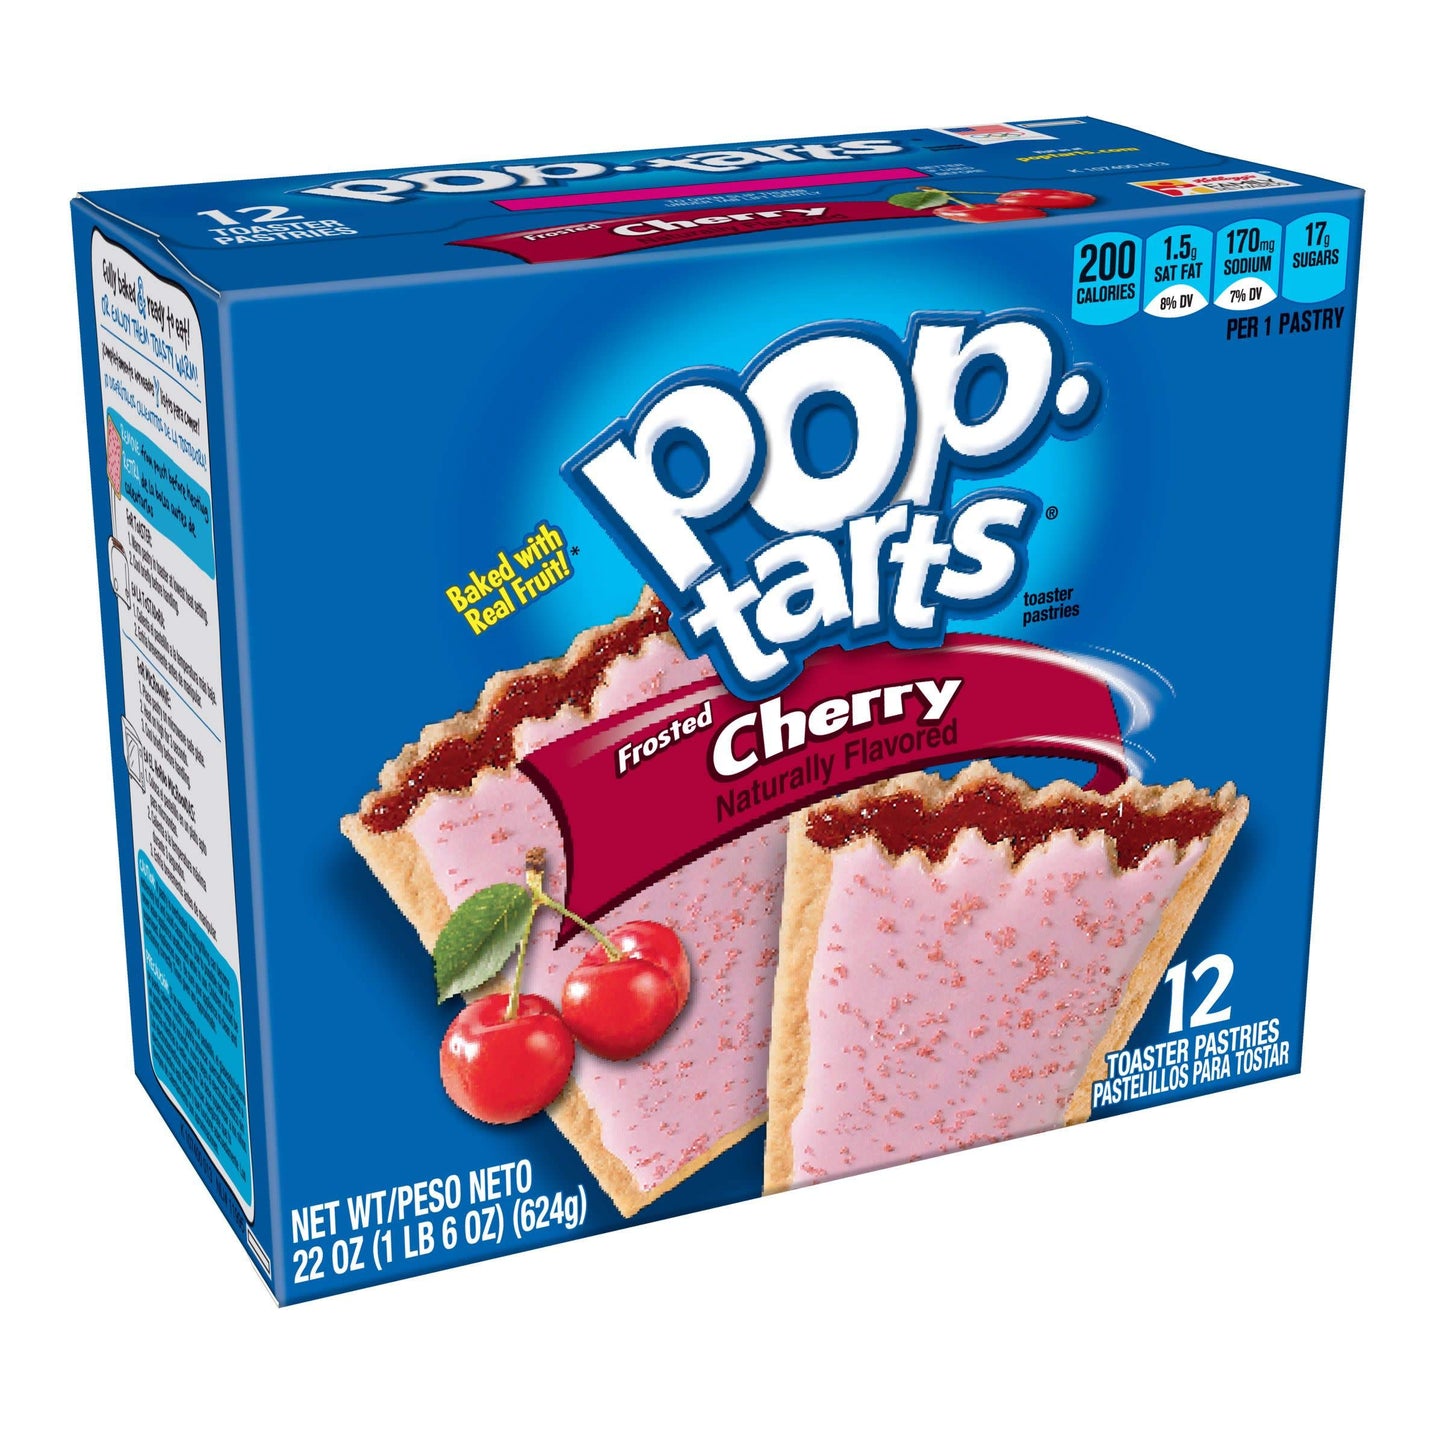 Pop-Tarts Frosted Cherry 12 Pack